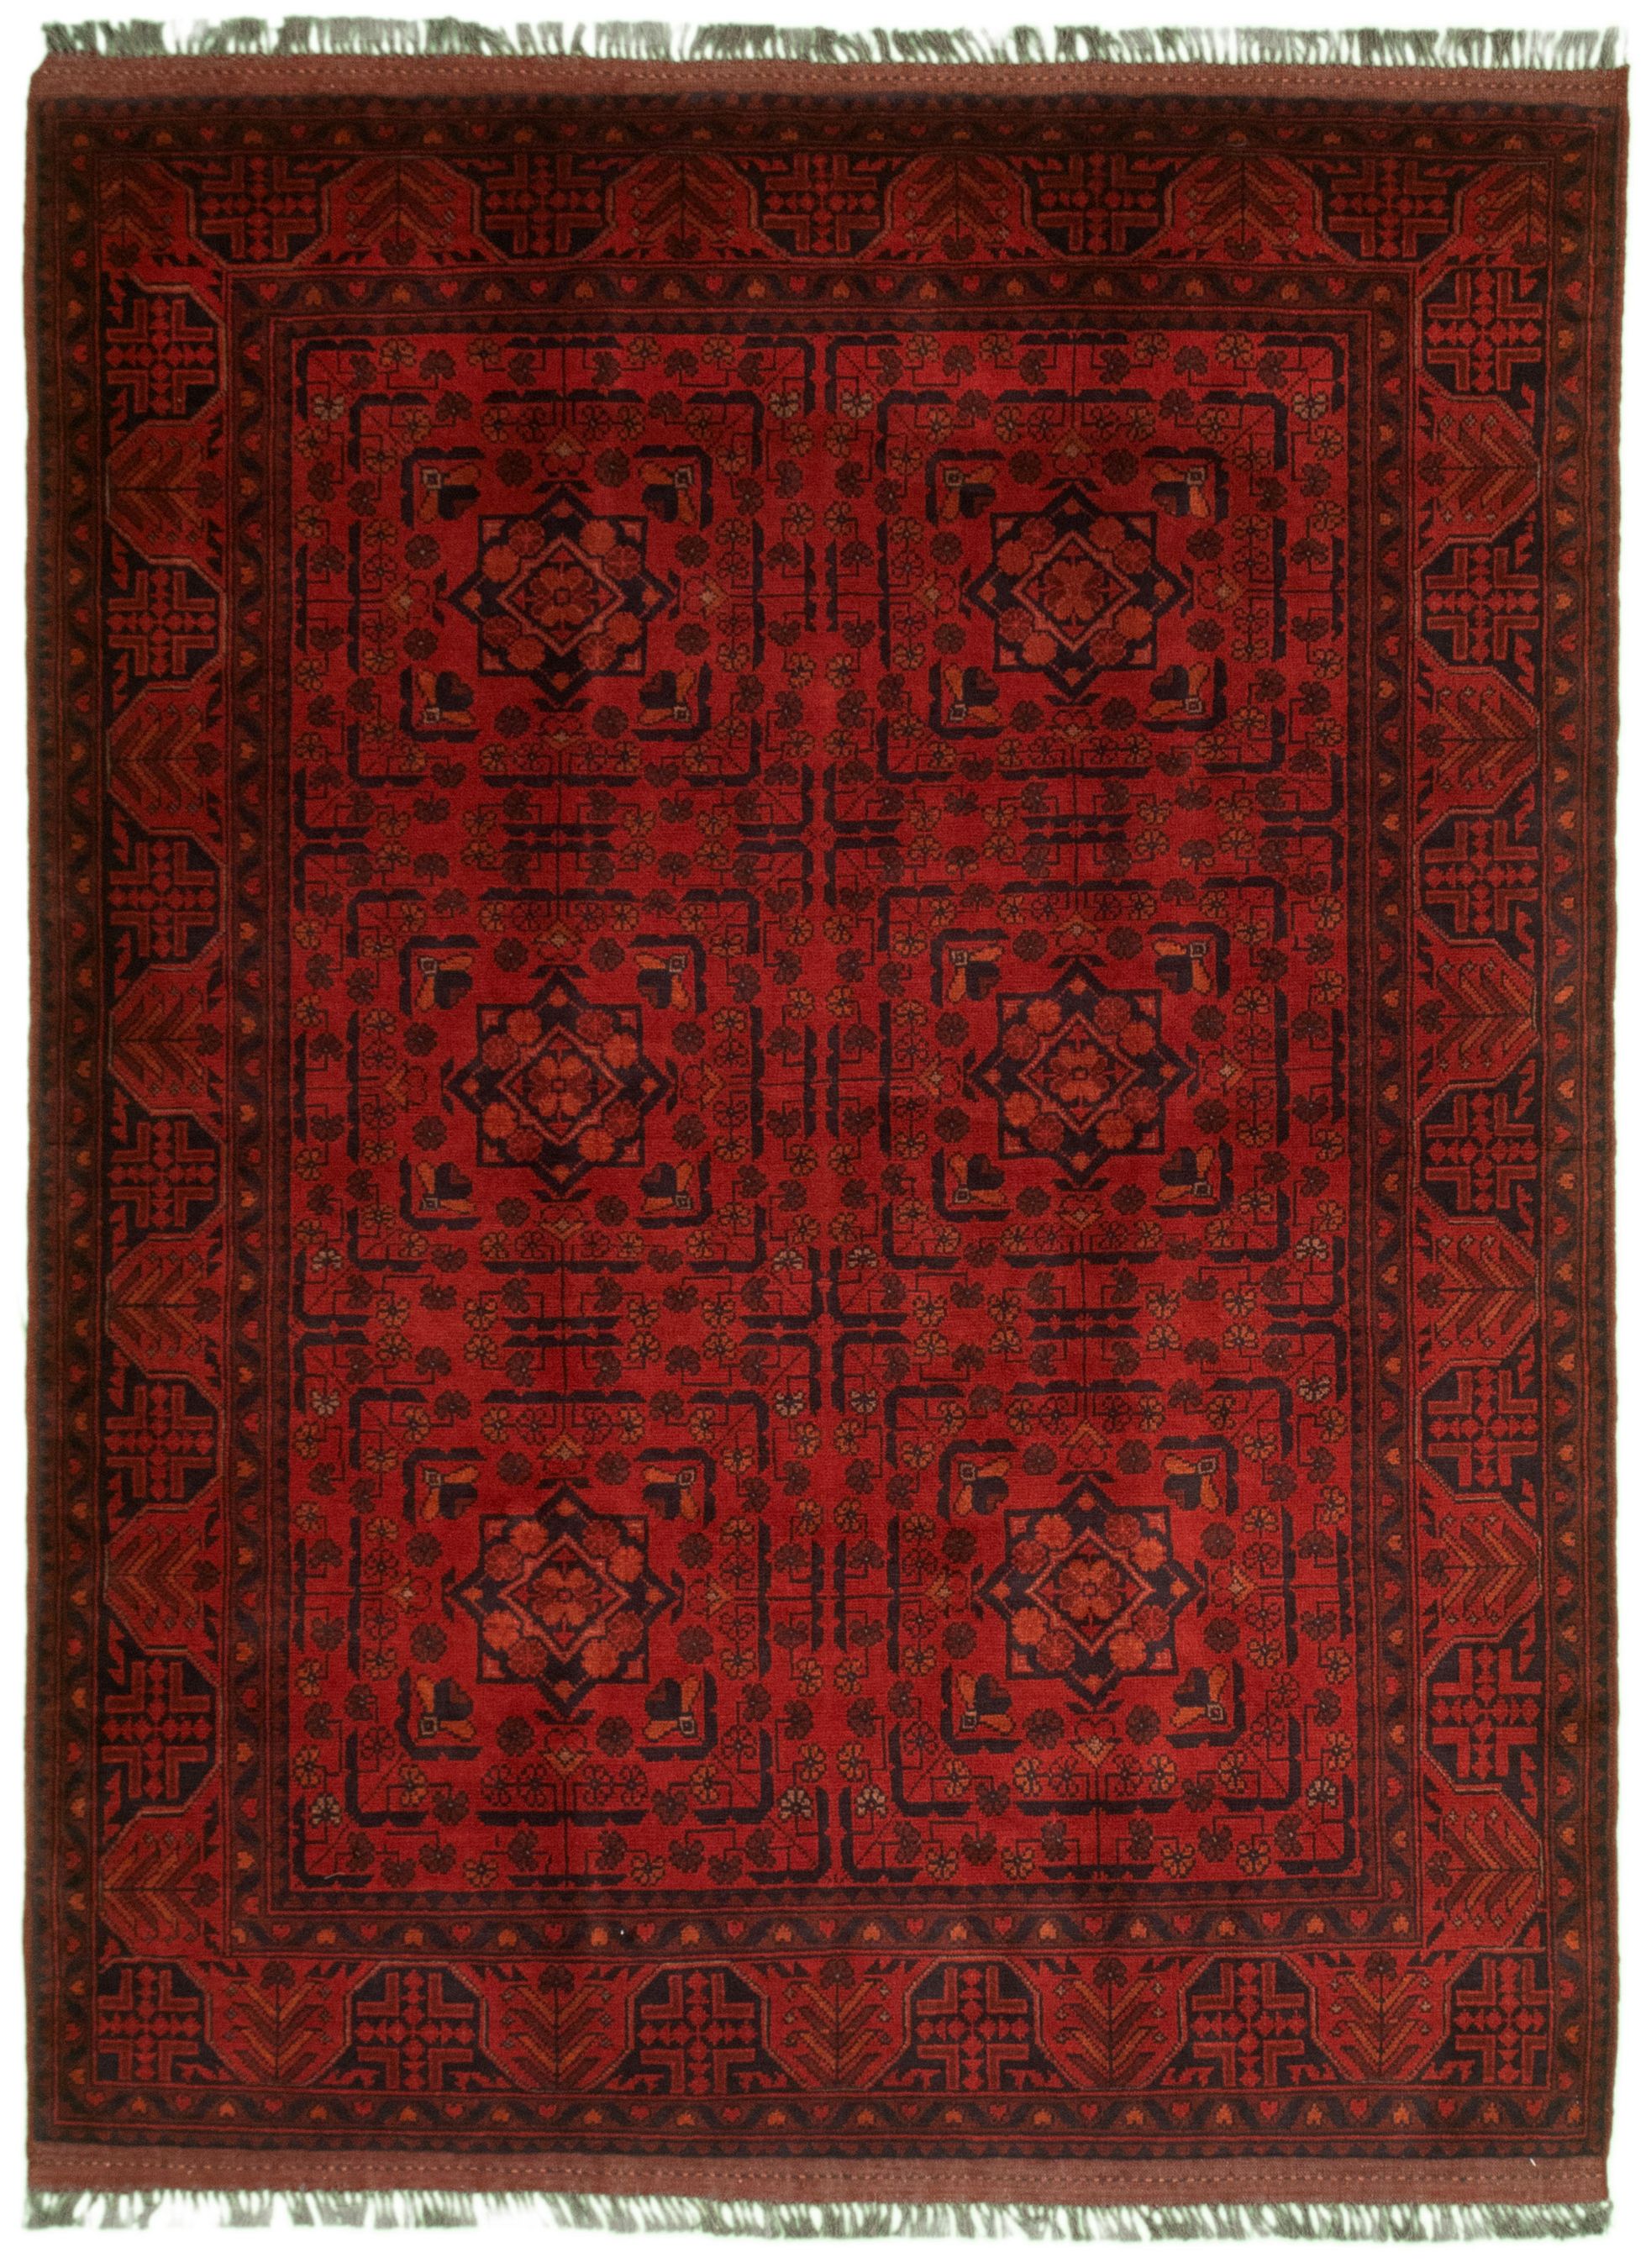 Hand-knotted Finest Khal Mohammadi Red Wool Rug 5'1" x 6'10"  Size: 5'1" x 6'10"  